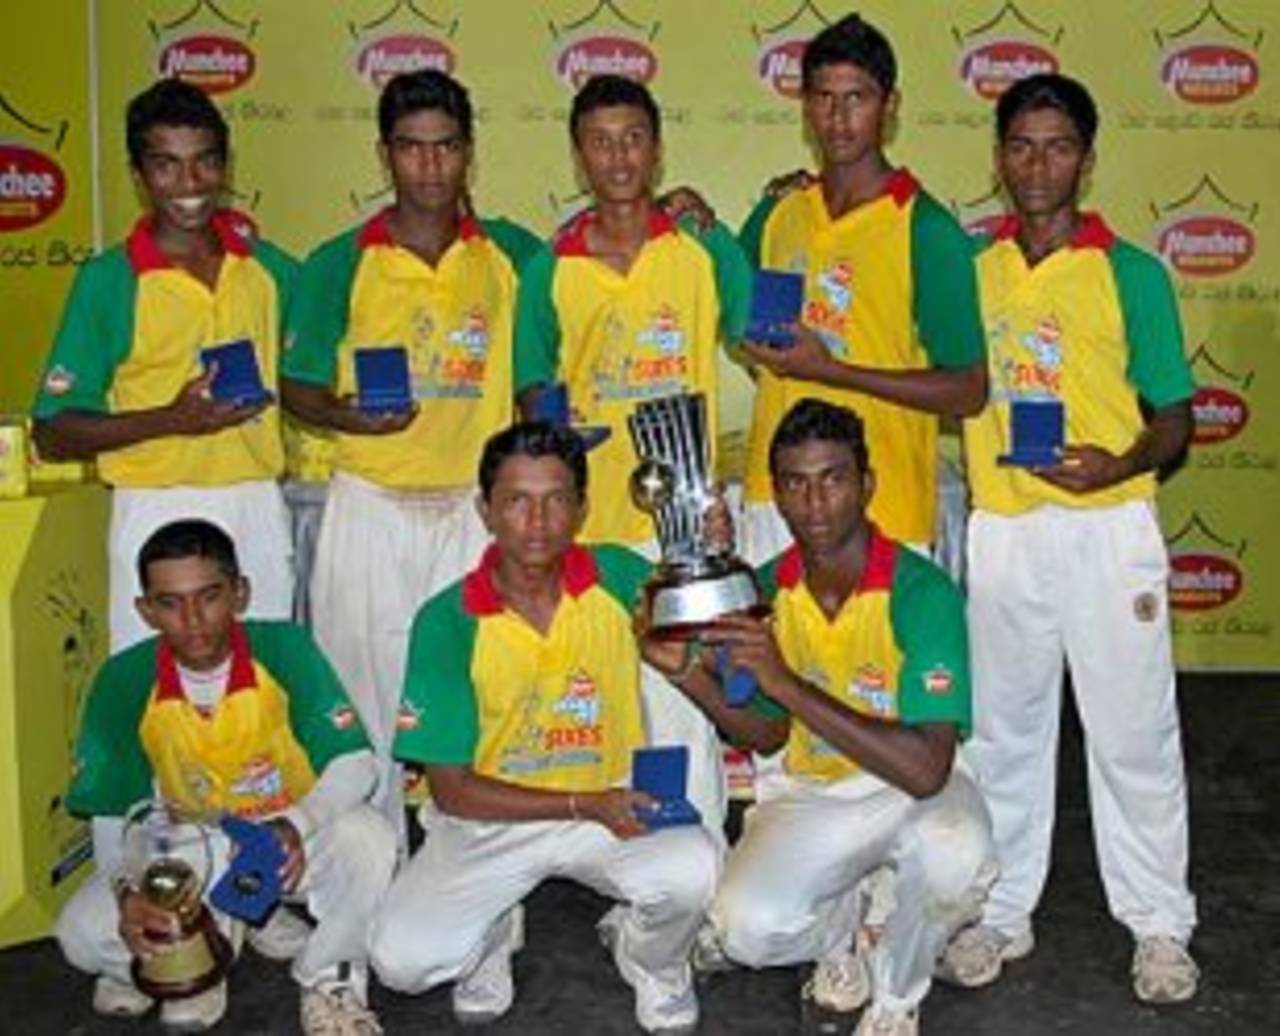 St. Sebastian's College with the runners-up' trophy, Glucofit Cricket Sixes, Colombo, October 18, 2009